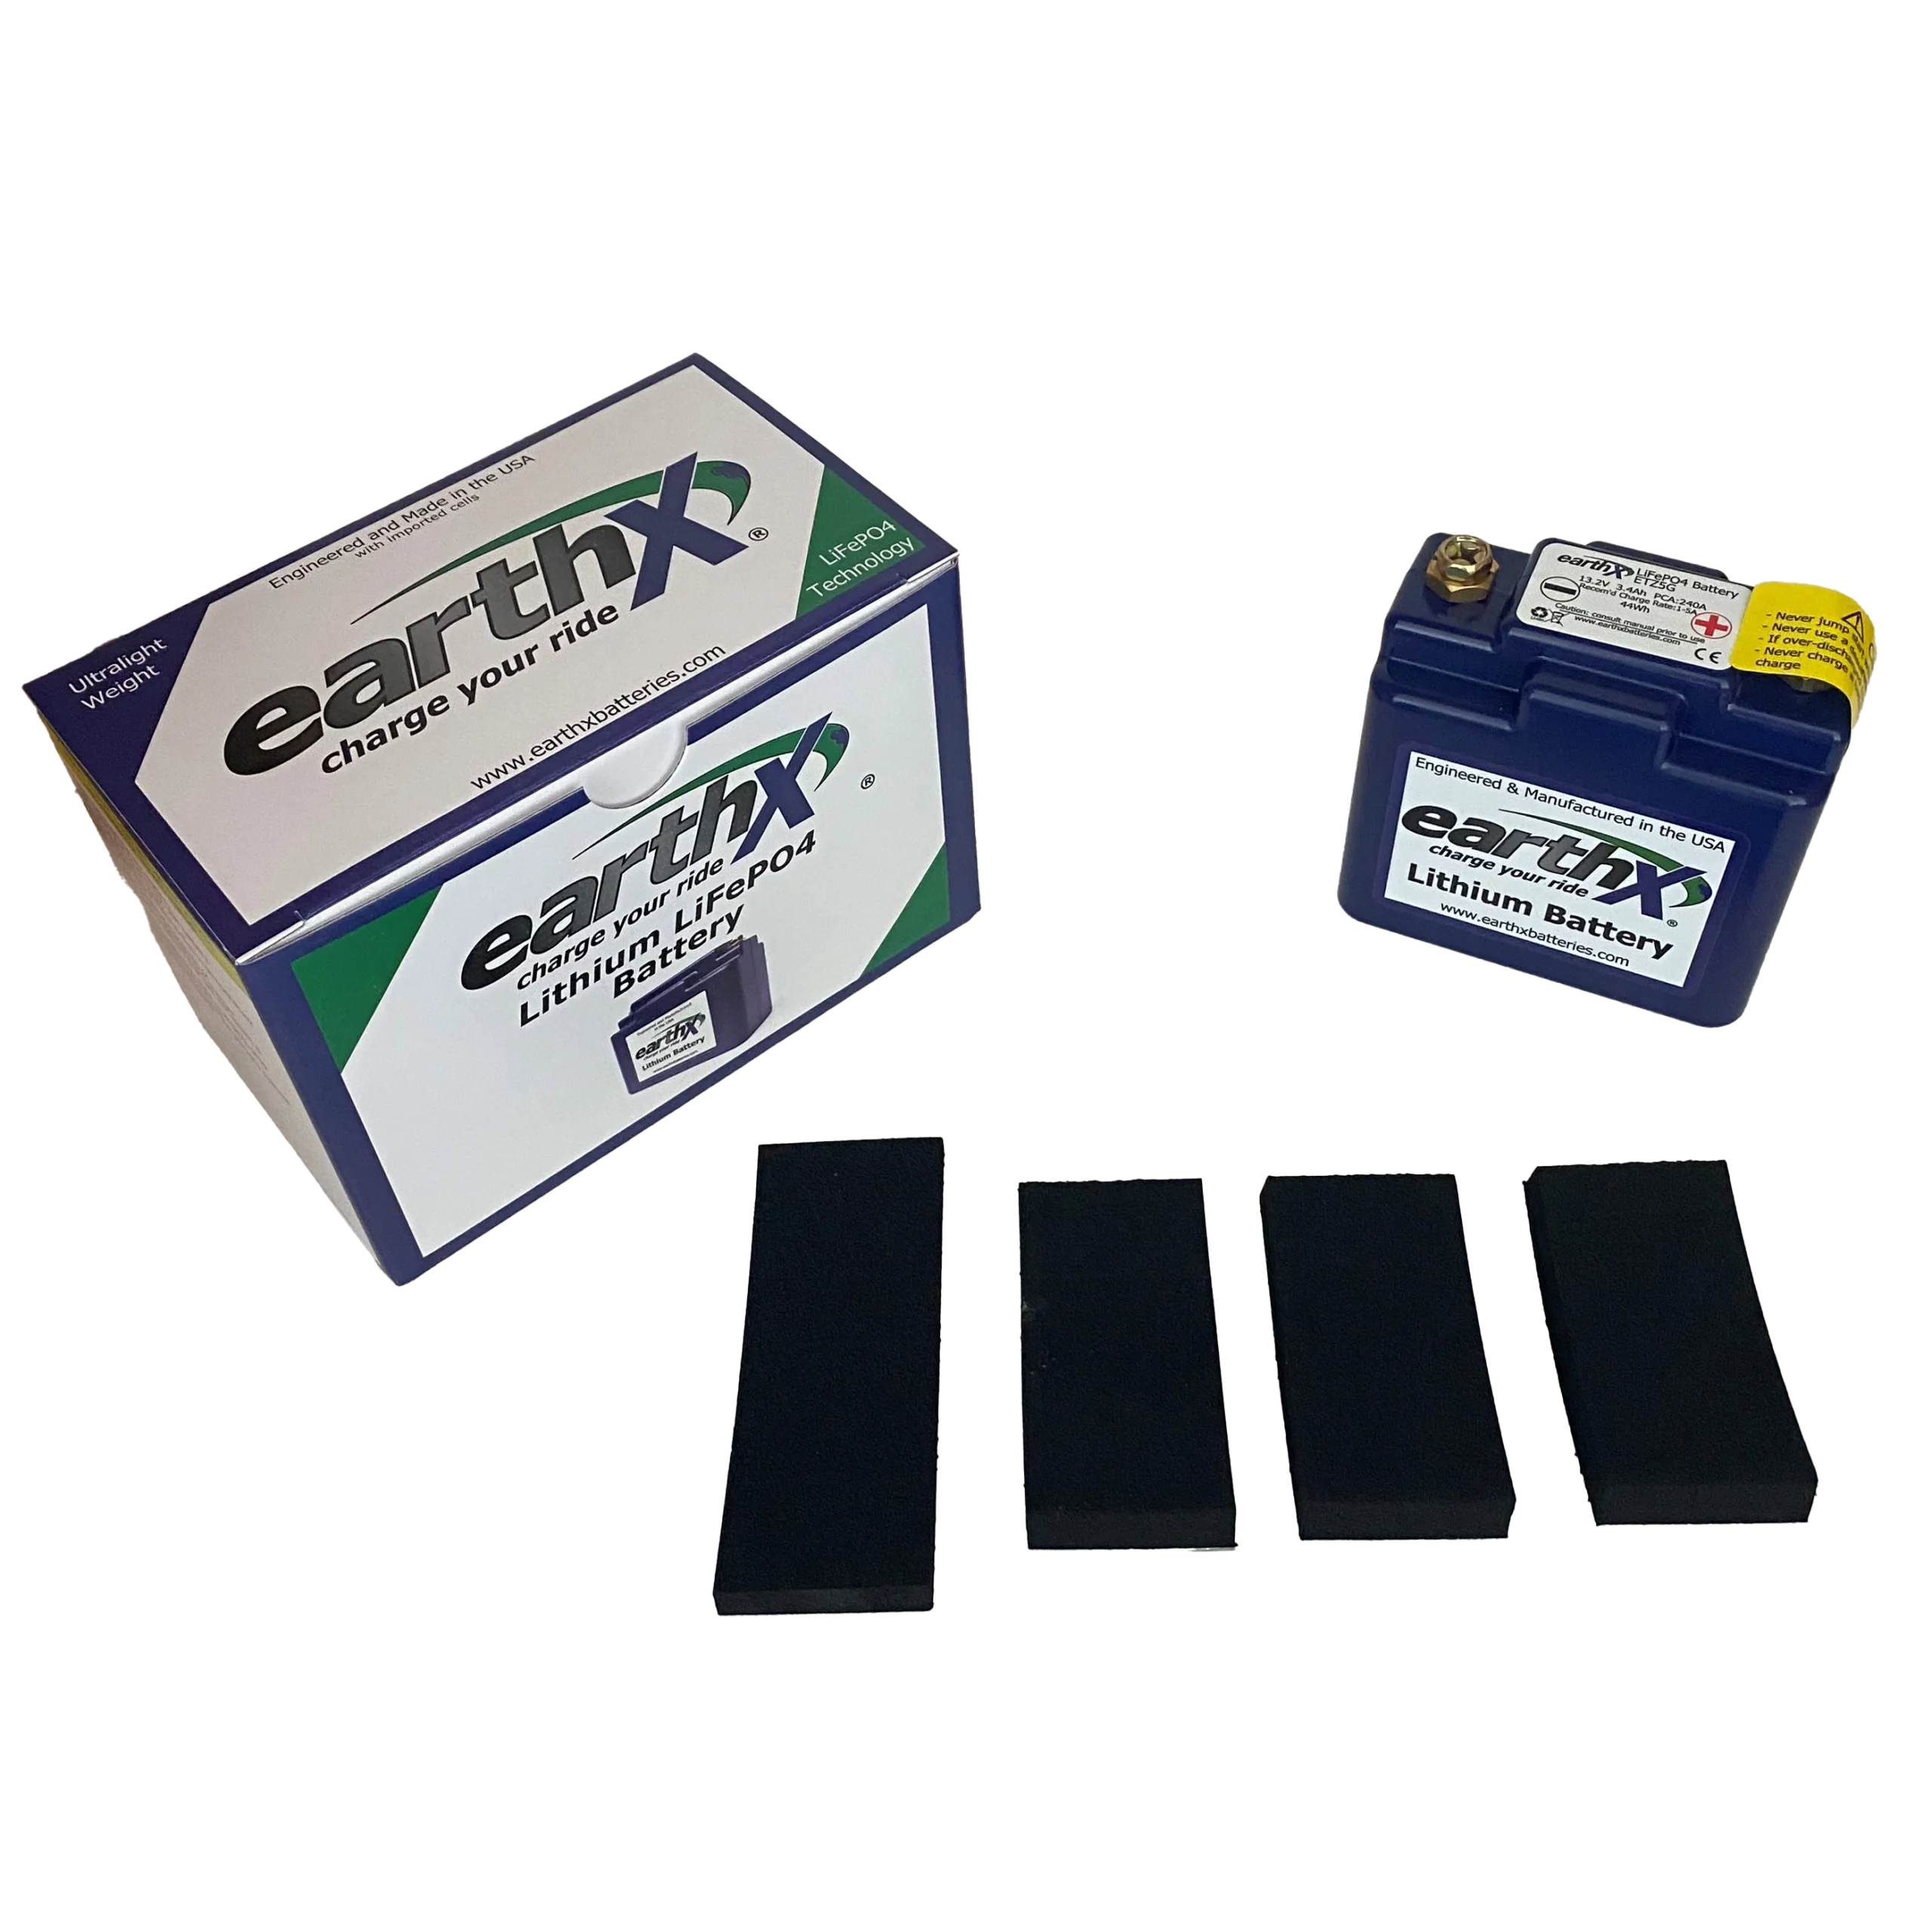 YTX4L-BS Lithium Replacement Battery compatible with KTM 300 XC